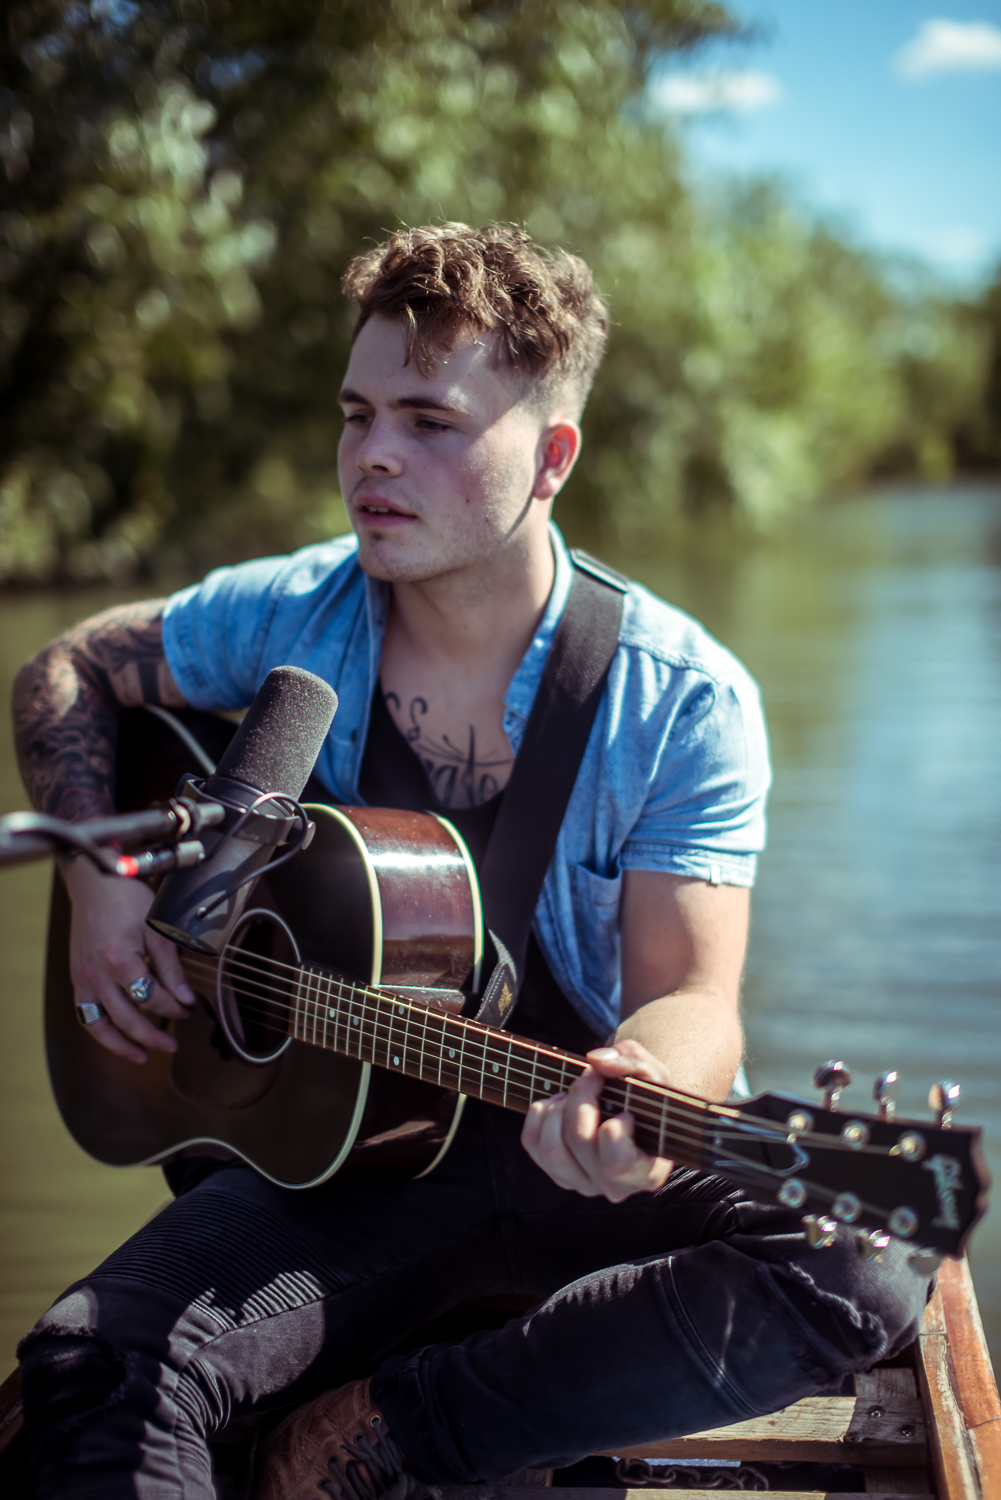 Oscar Corney recording a music video on a punt for the Bridge Sessions in Granchester, Cambridge